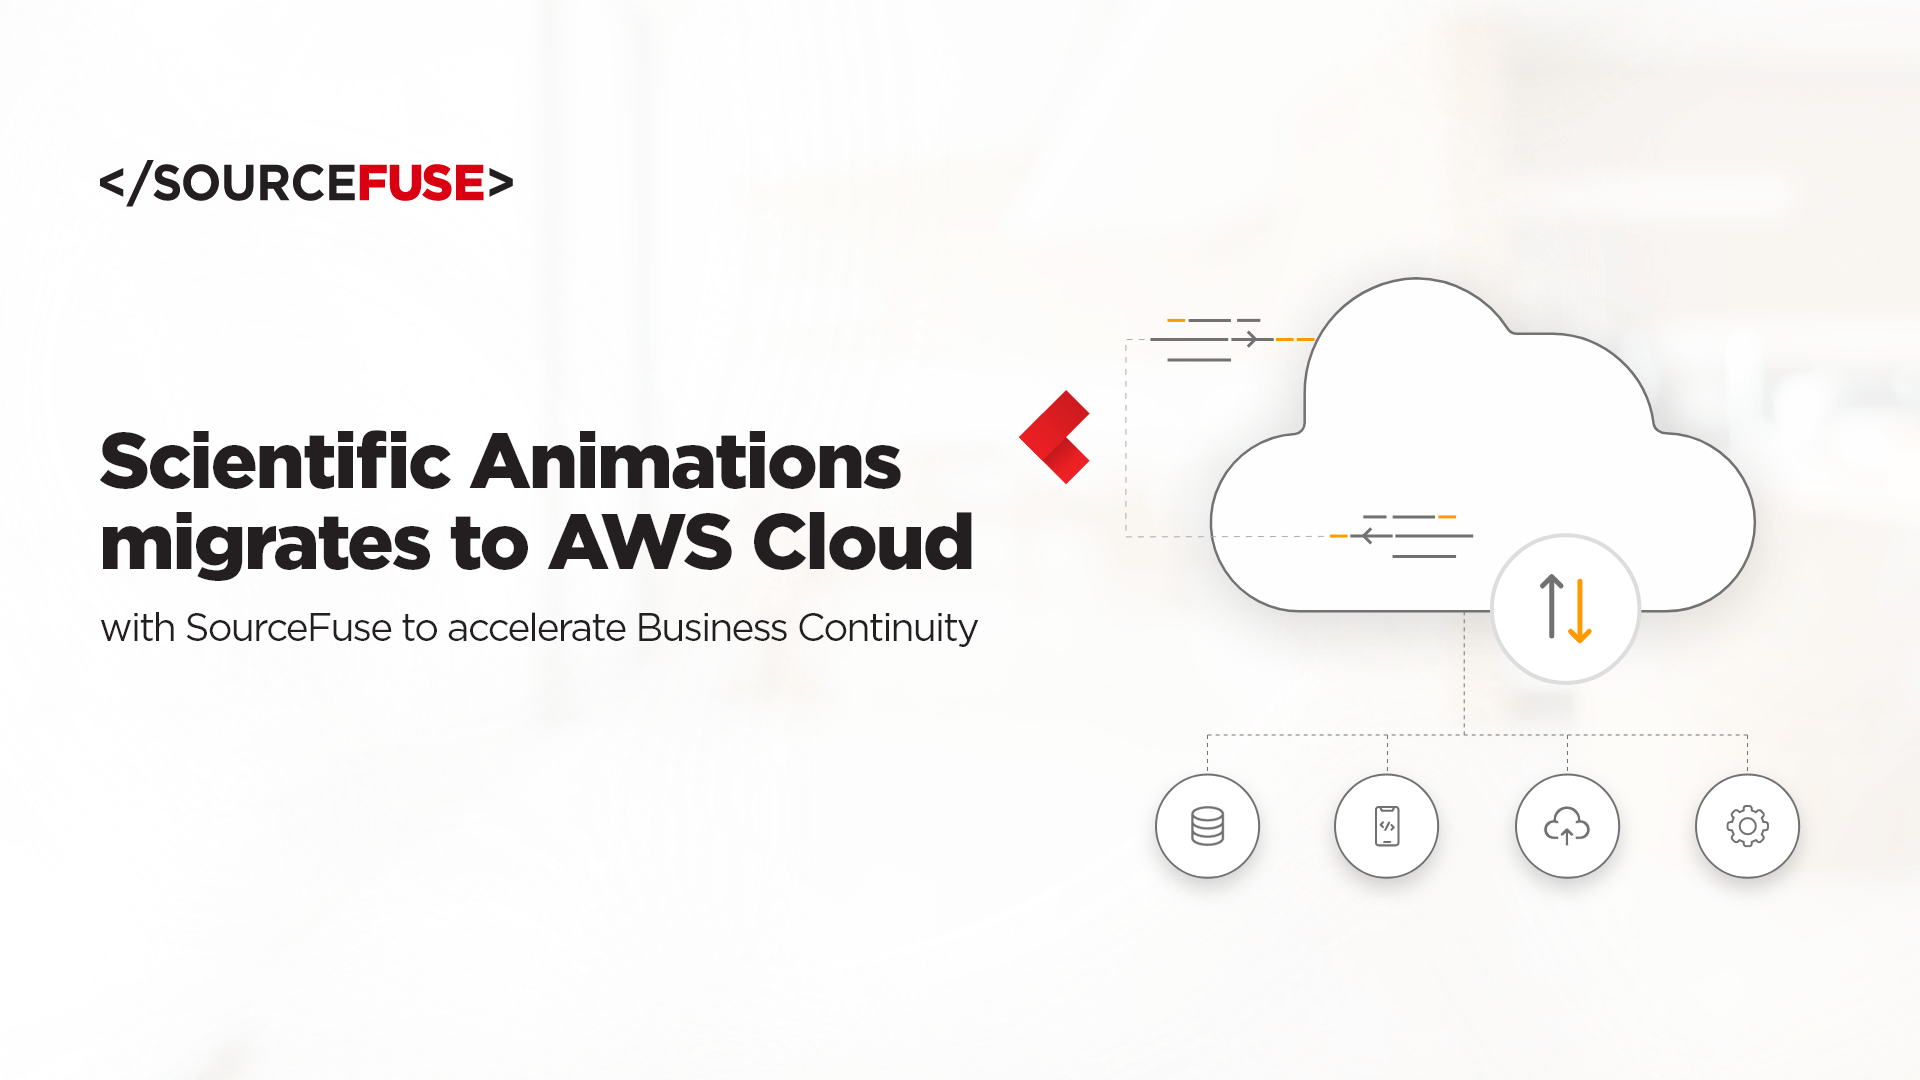 Scientific Animations migrates to AWS Cloud